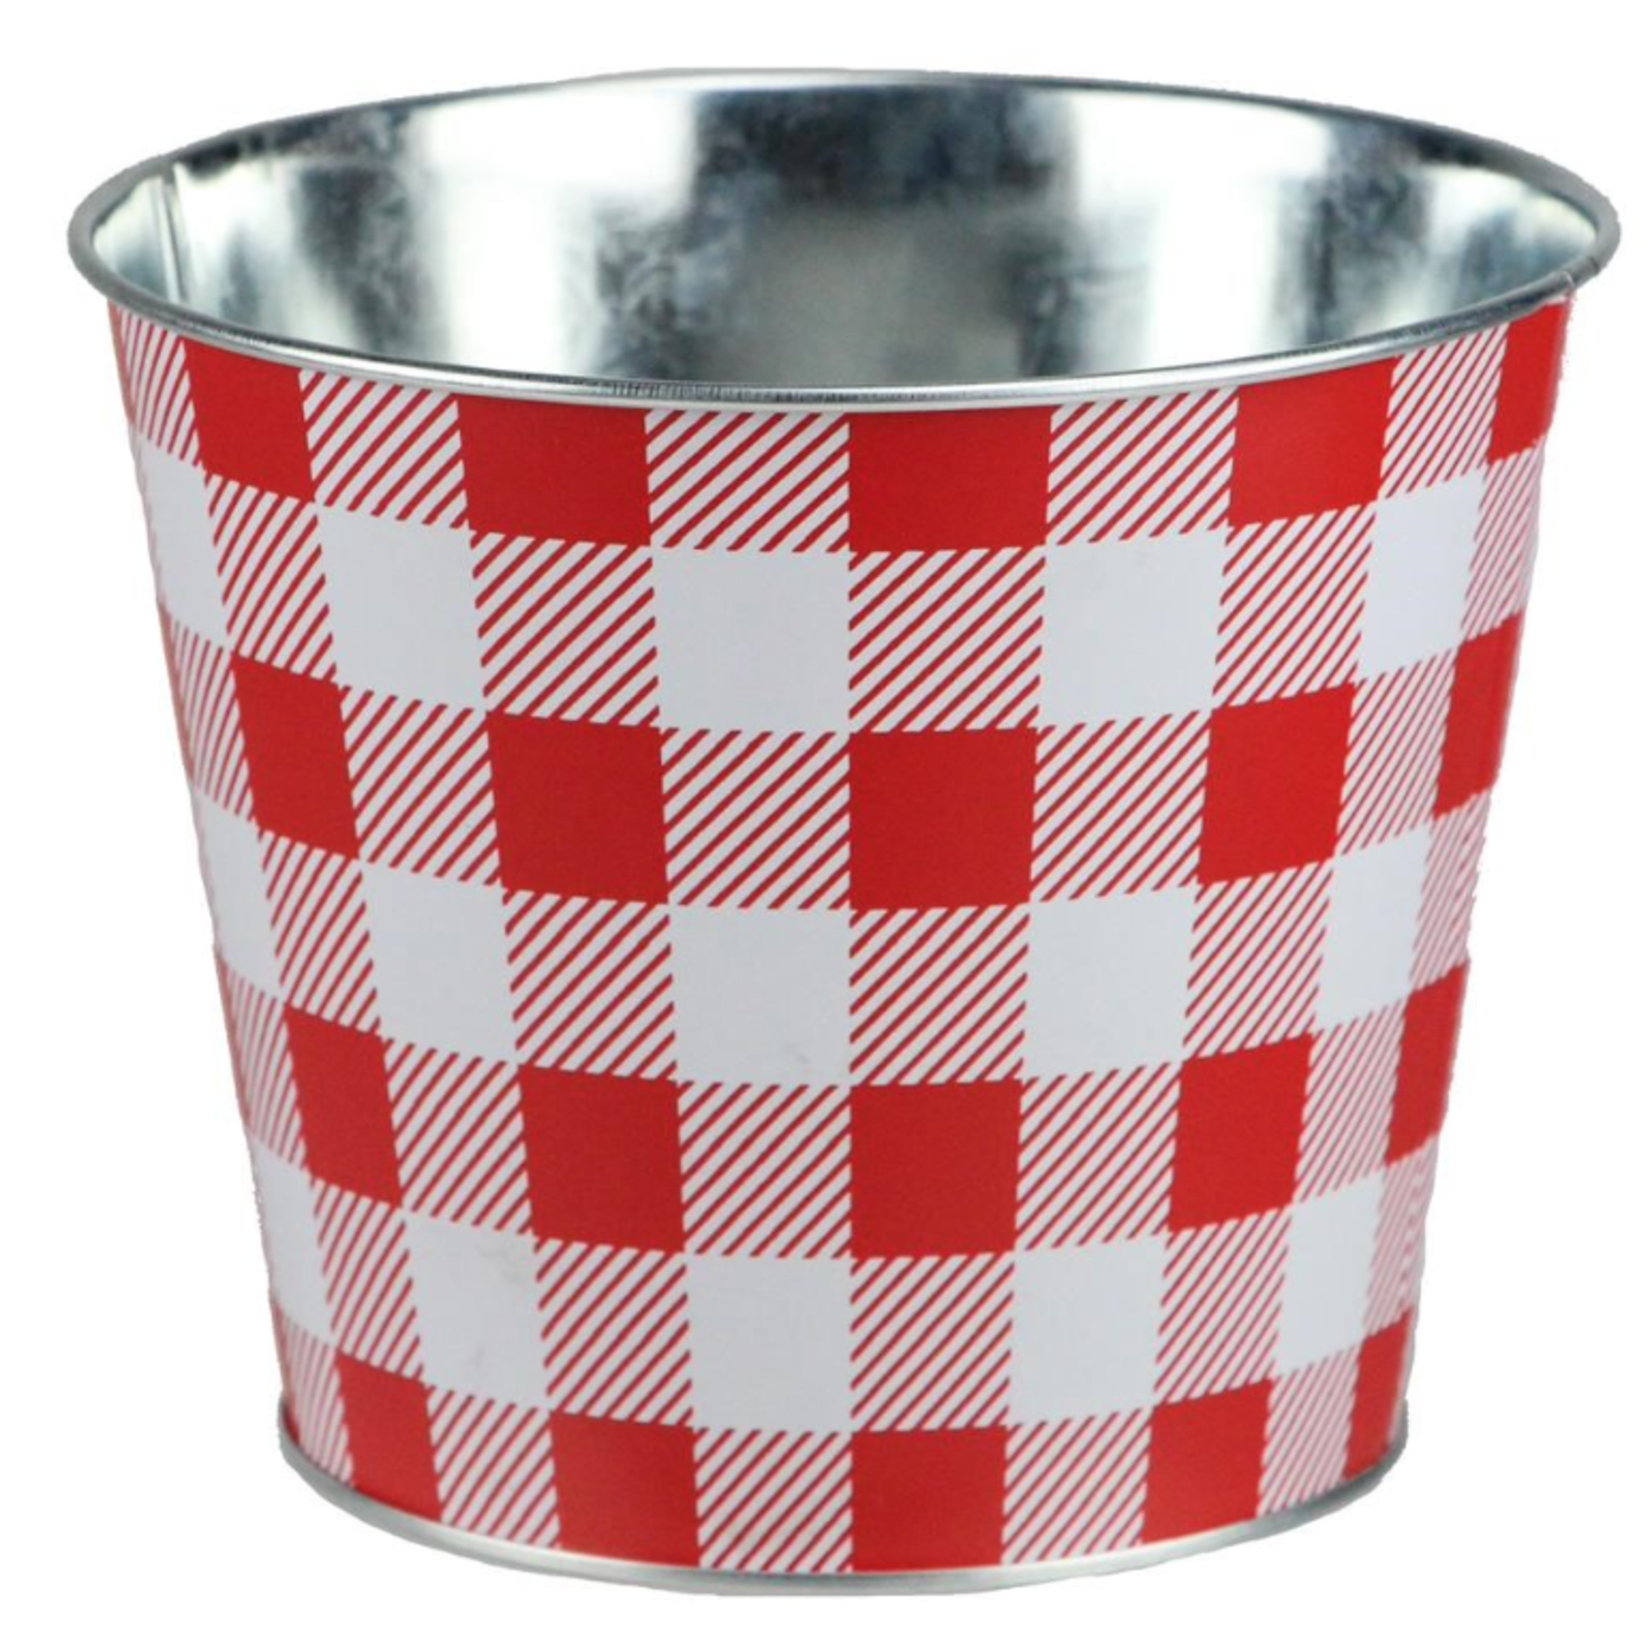 6.75" X 5.5" RED AND WHITE GALVANIZED POT COVER